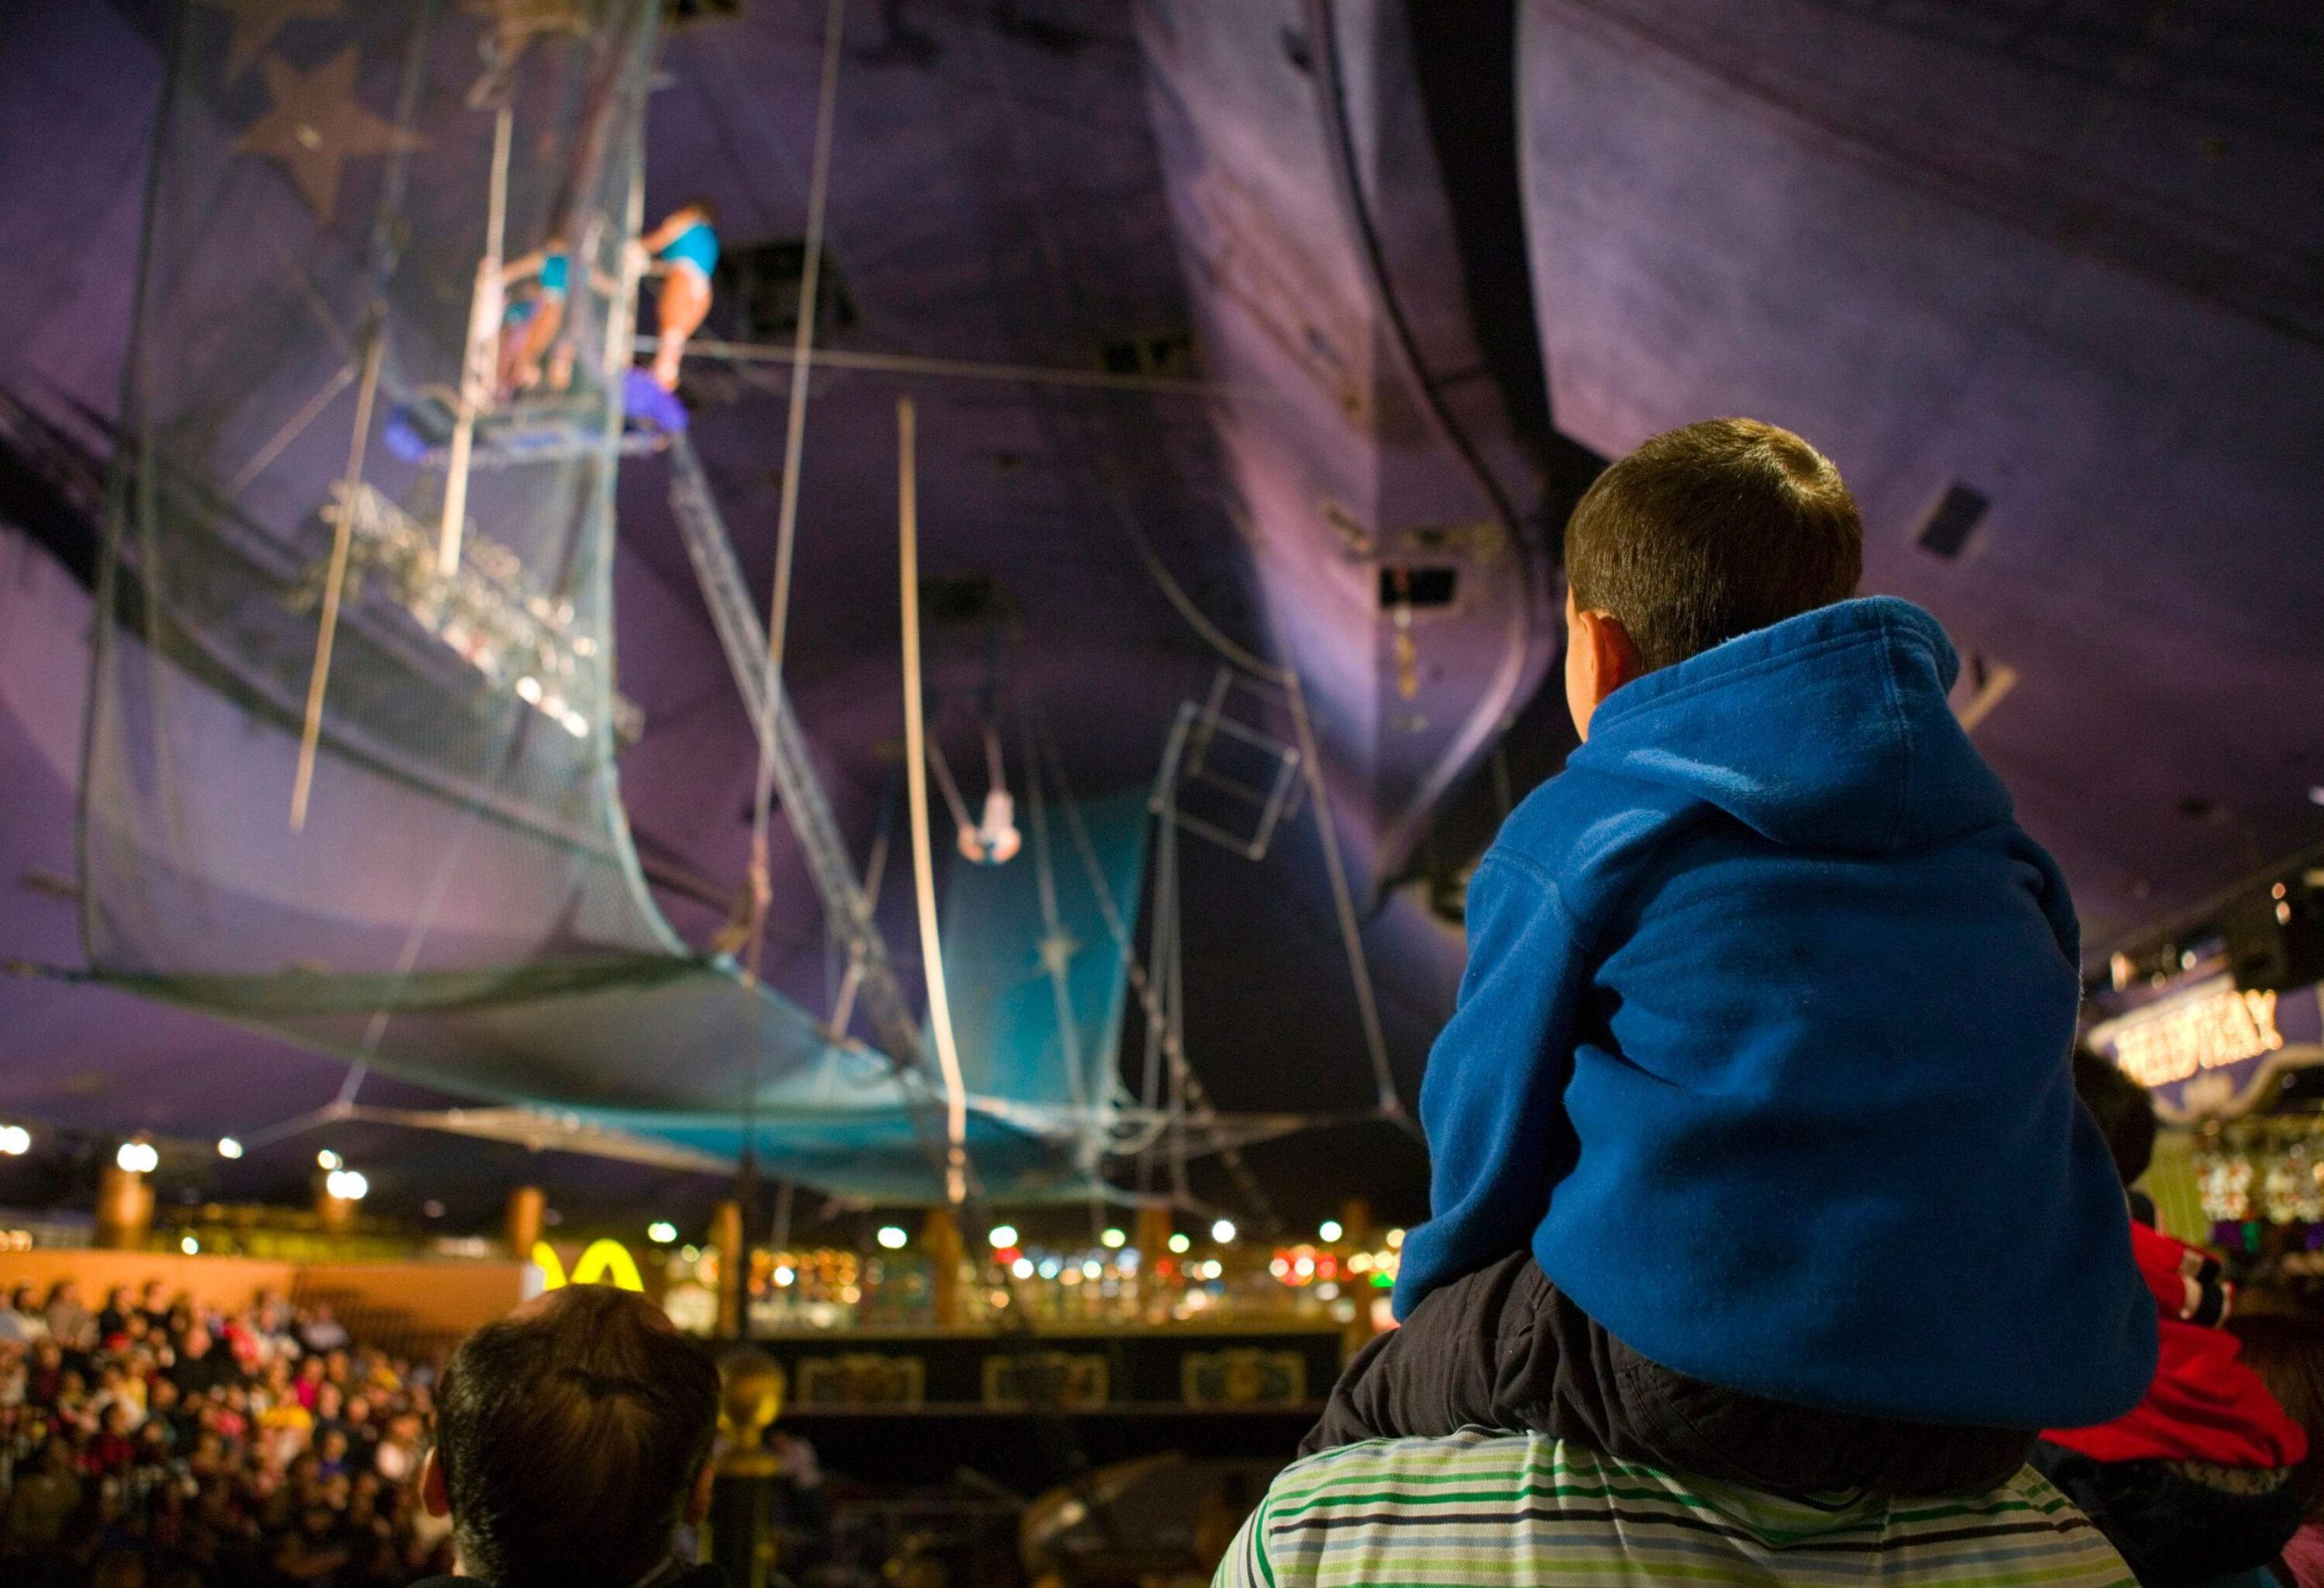 A child perches upon someone's shoulder, their eyes wide with wonder, amid the captivating spectacle of a vibrant circus show.